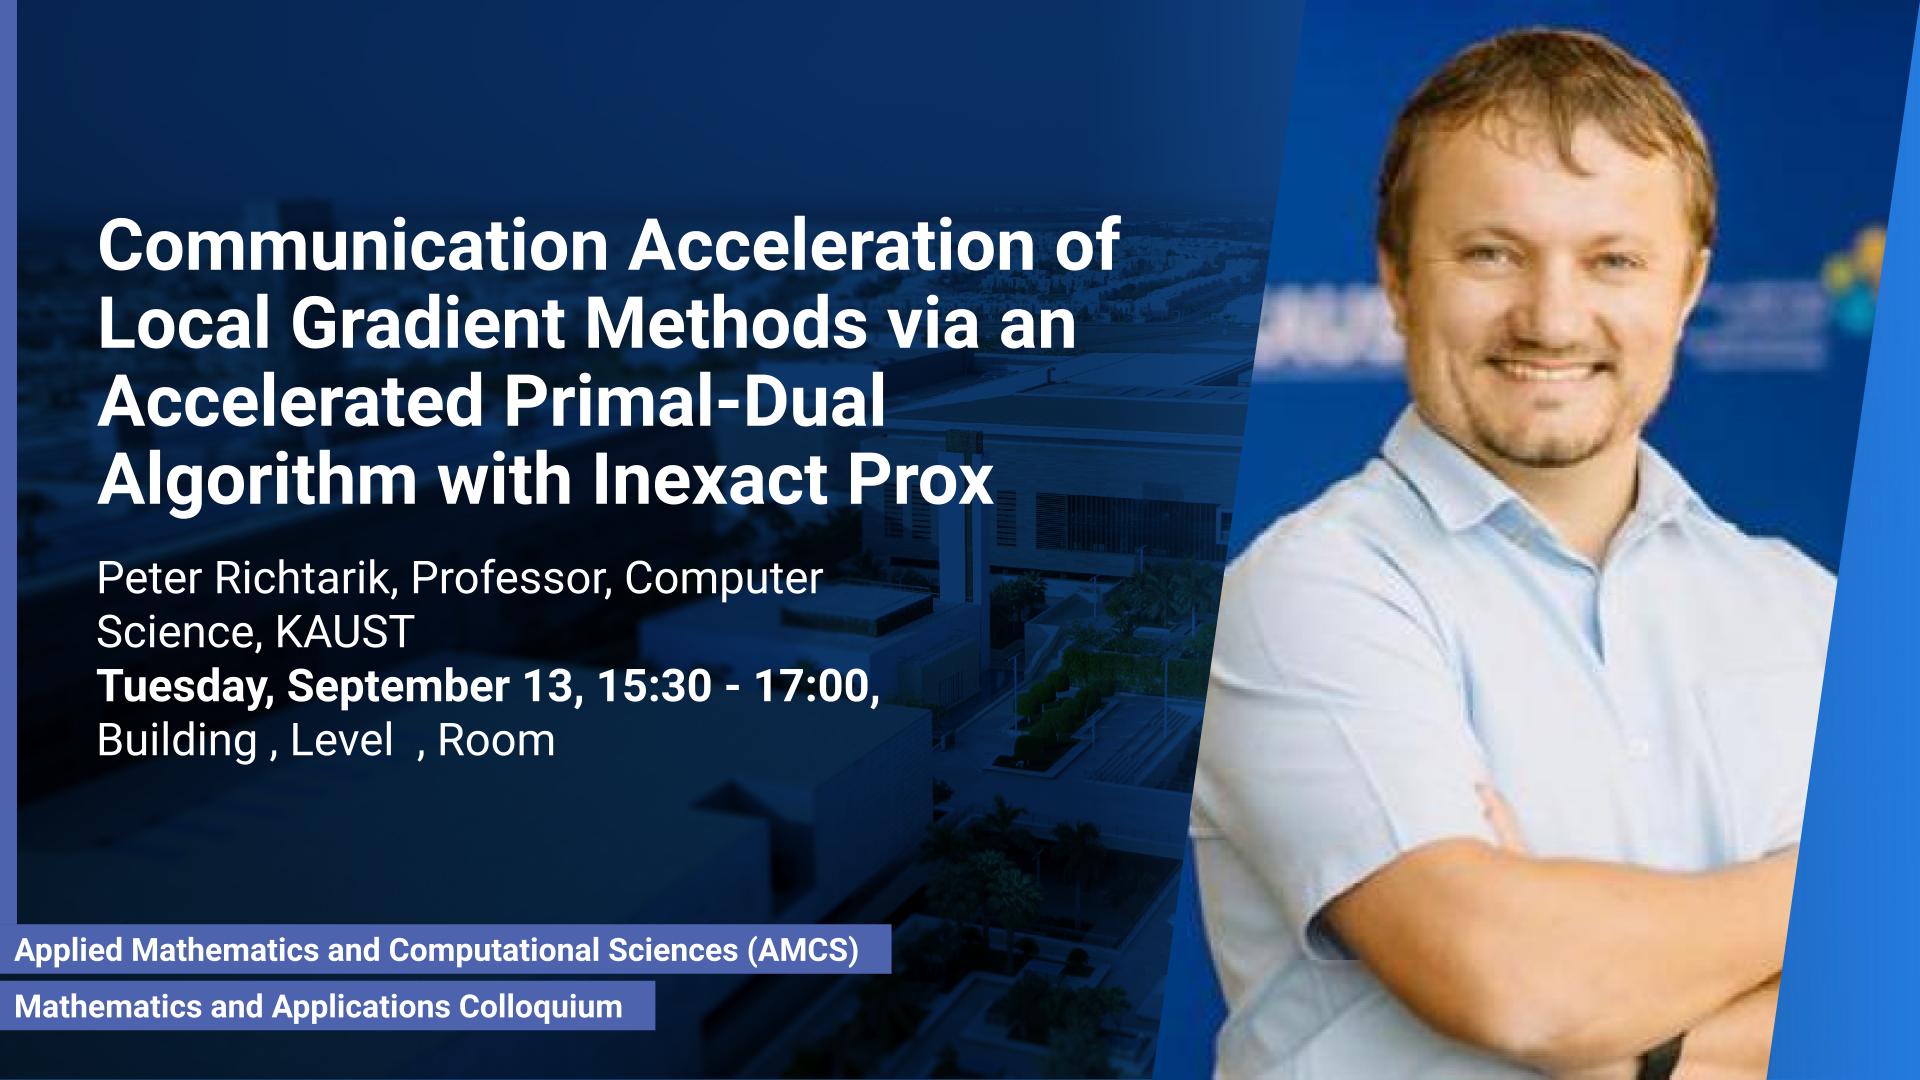 KAUST CEMSE AMCS Mathematics and Applications Colloquium Peter Richtarik Communication Acceleration of Local Gradient Methods via an Accelerated Primal-Dual Algorithm with Inexact Prox 